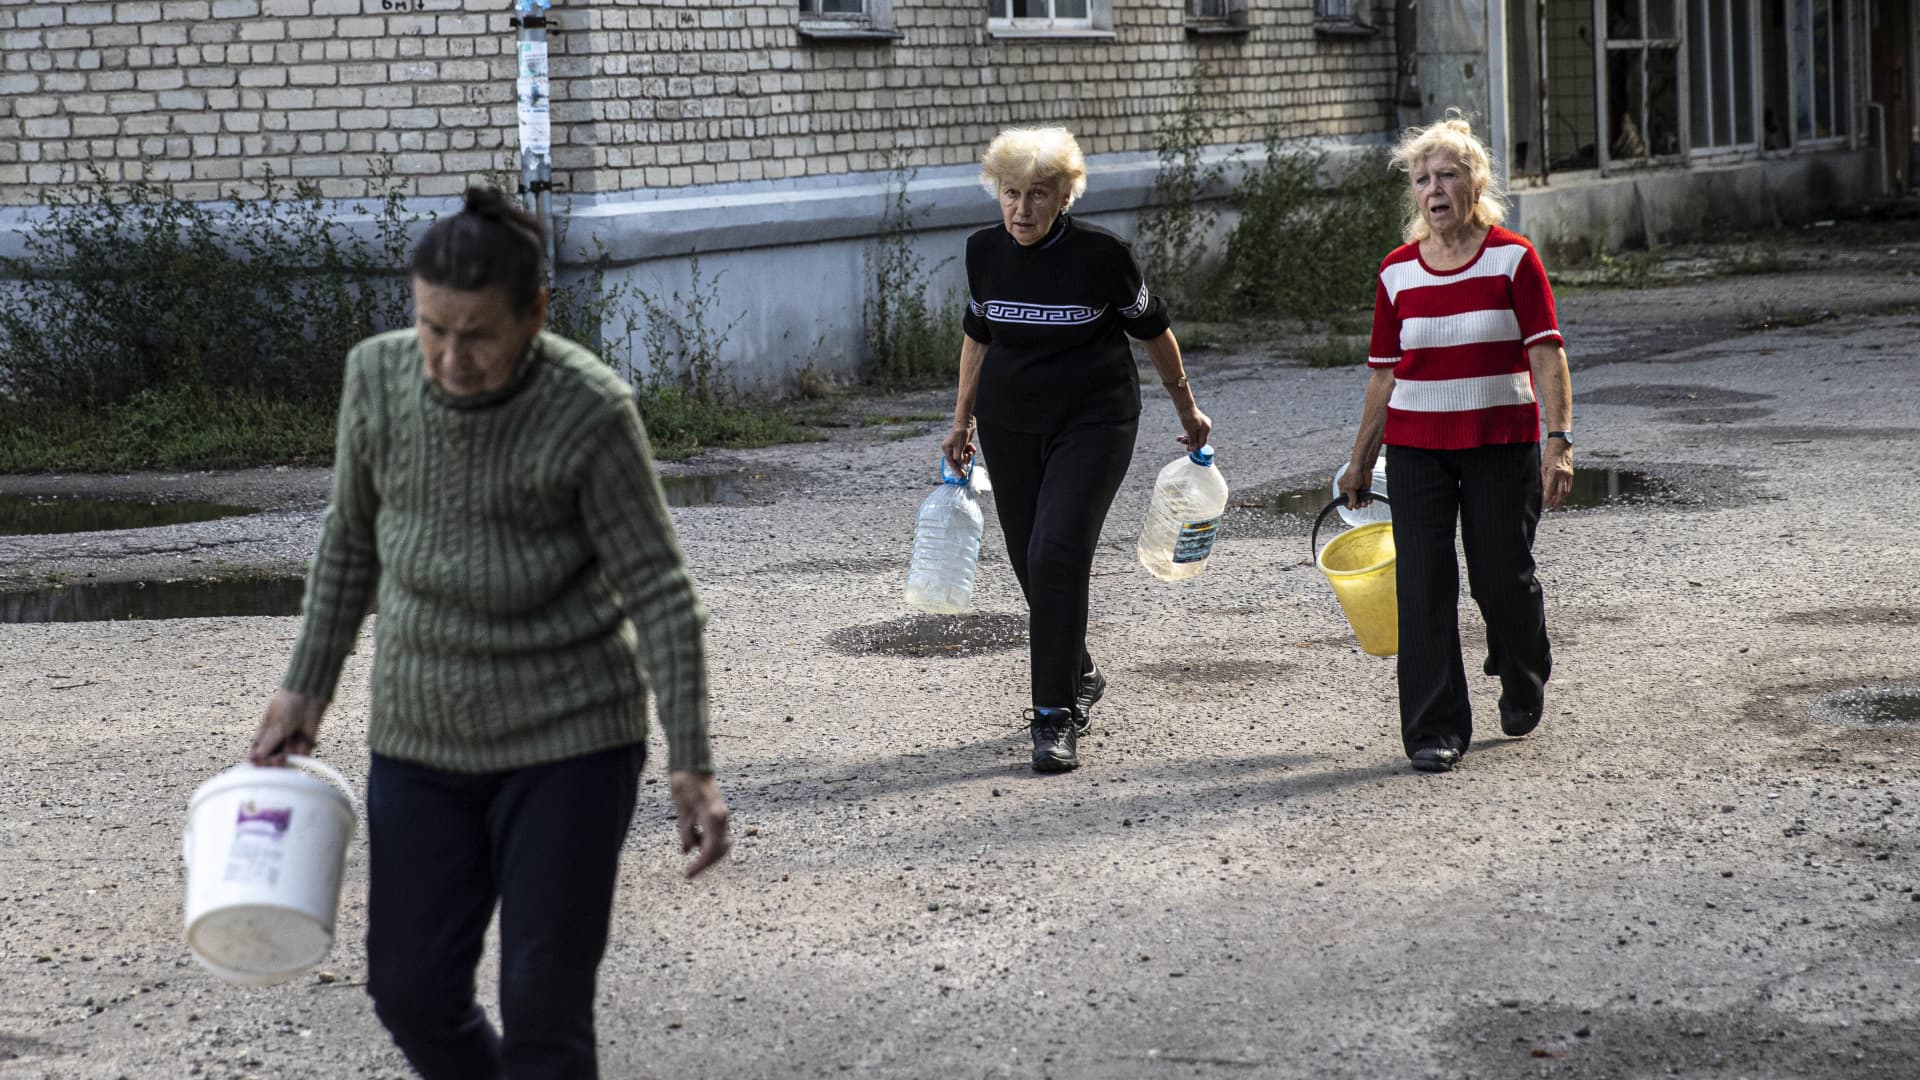 Ukrainian citizens carry bottles and buckets to receive clean water delivered by volunteer organizations after Russian Forces withdrawal from Izyum as Russia-Ukraine war continues in Izium, Kharkiv Oblast, Ukraine on September 18, 2022.